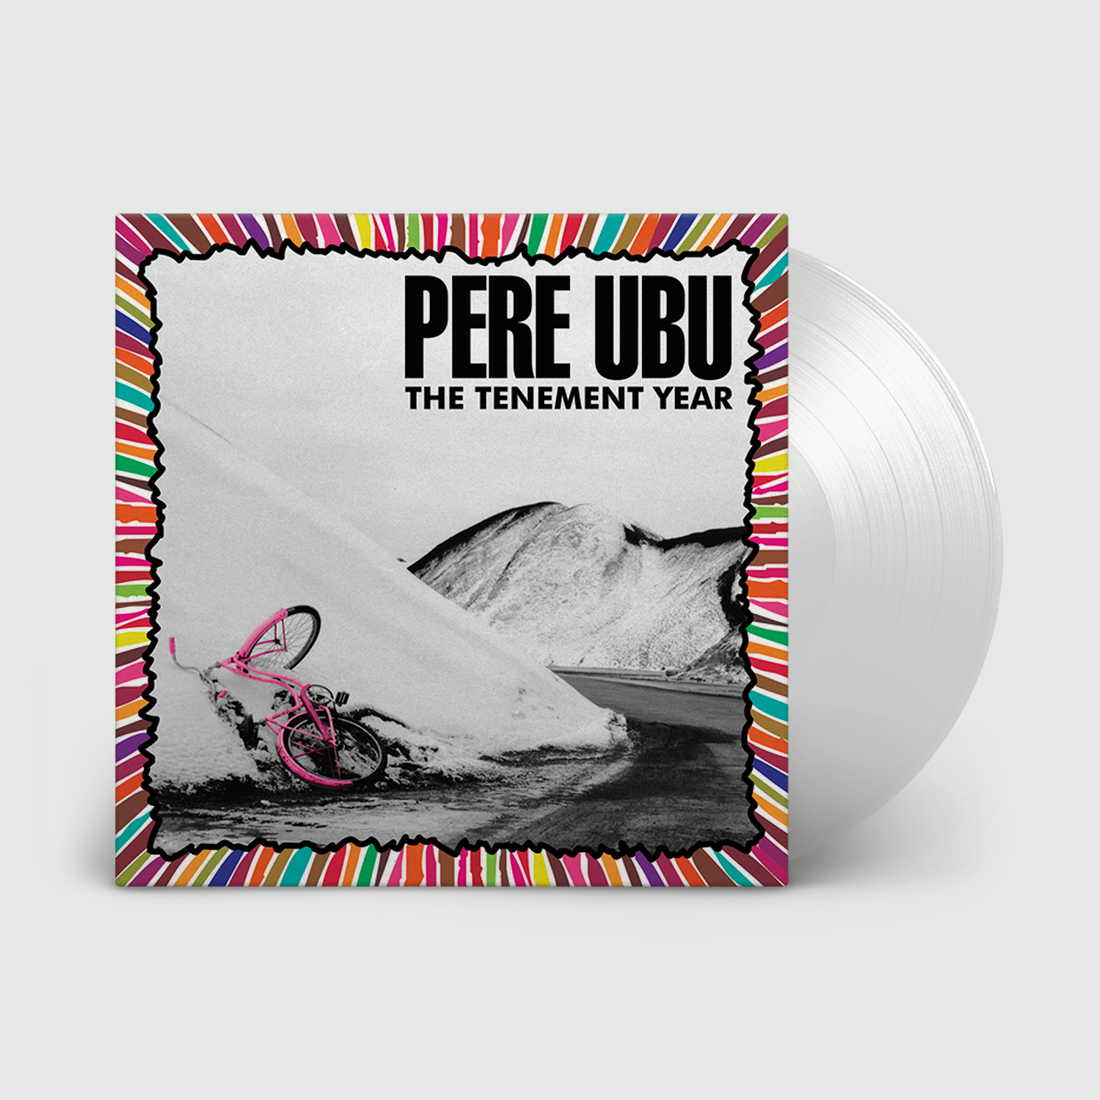 PERE UBU - The Tenement Year - LP - Limited Clear Vinyl [NAD-OCT10]